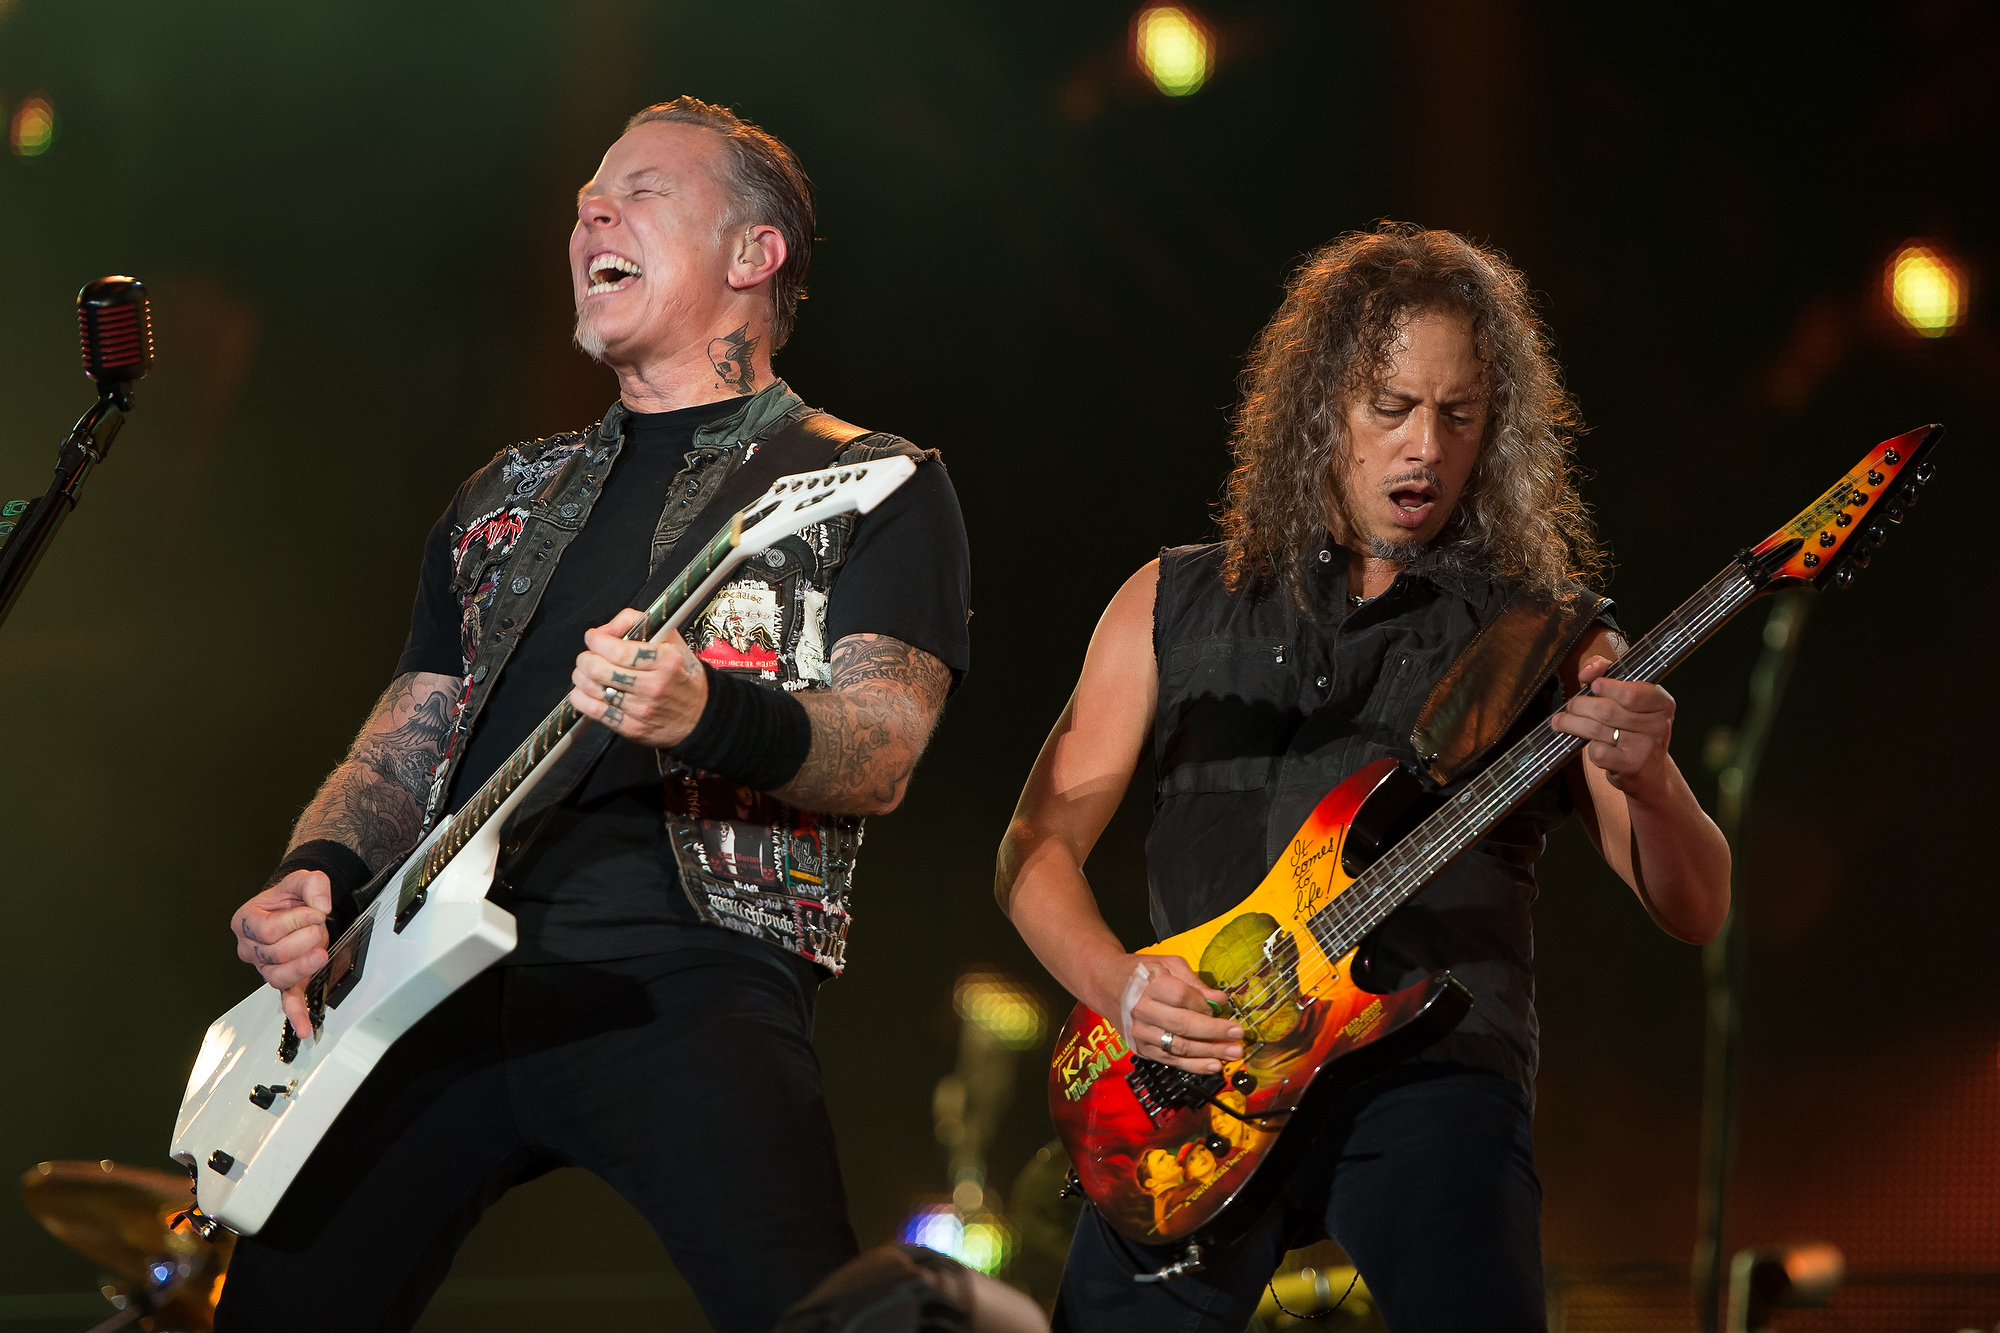 Watch Metallica perform “Ride the Lighting” Live at Boston Calling!